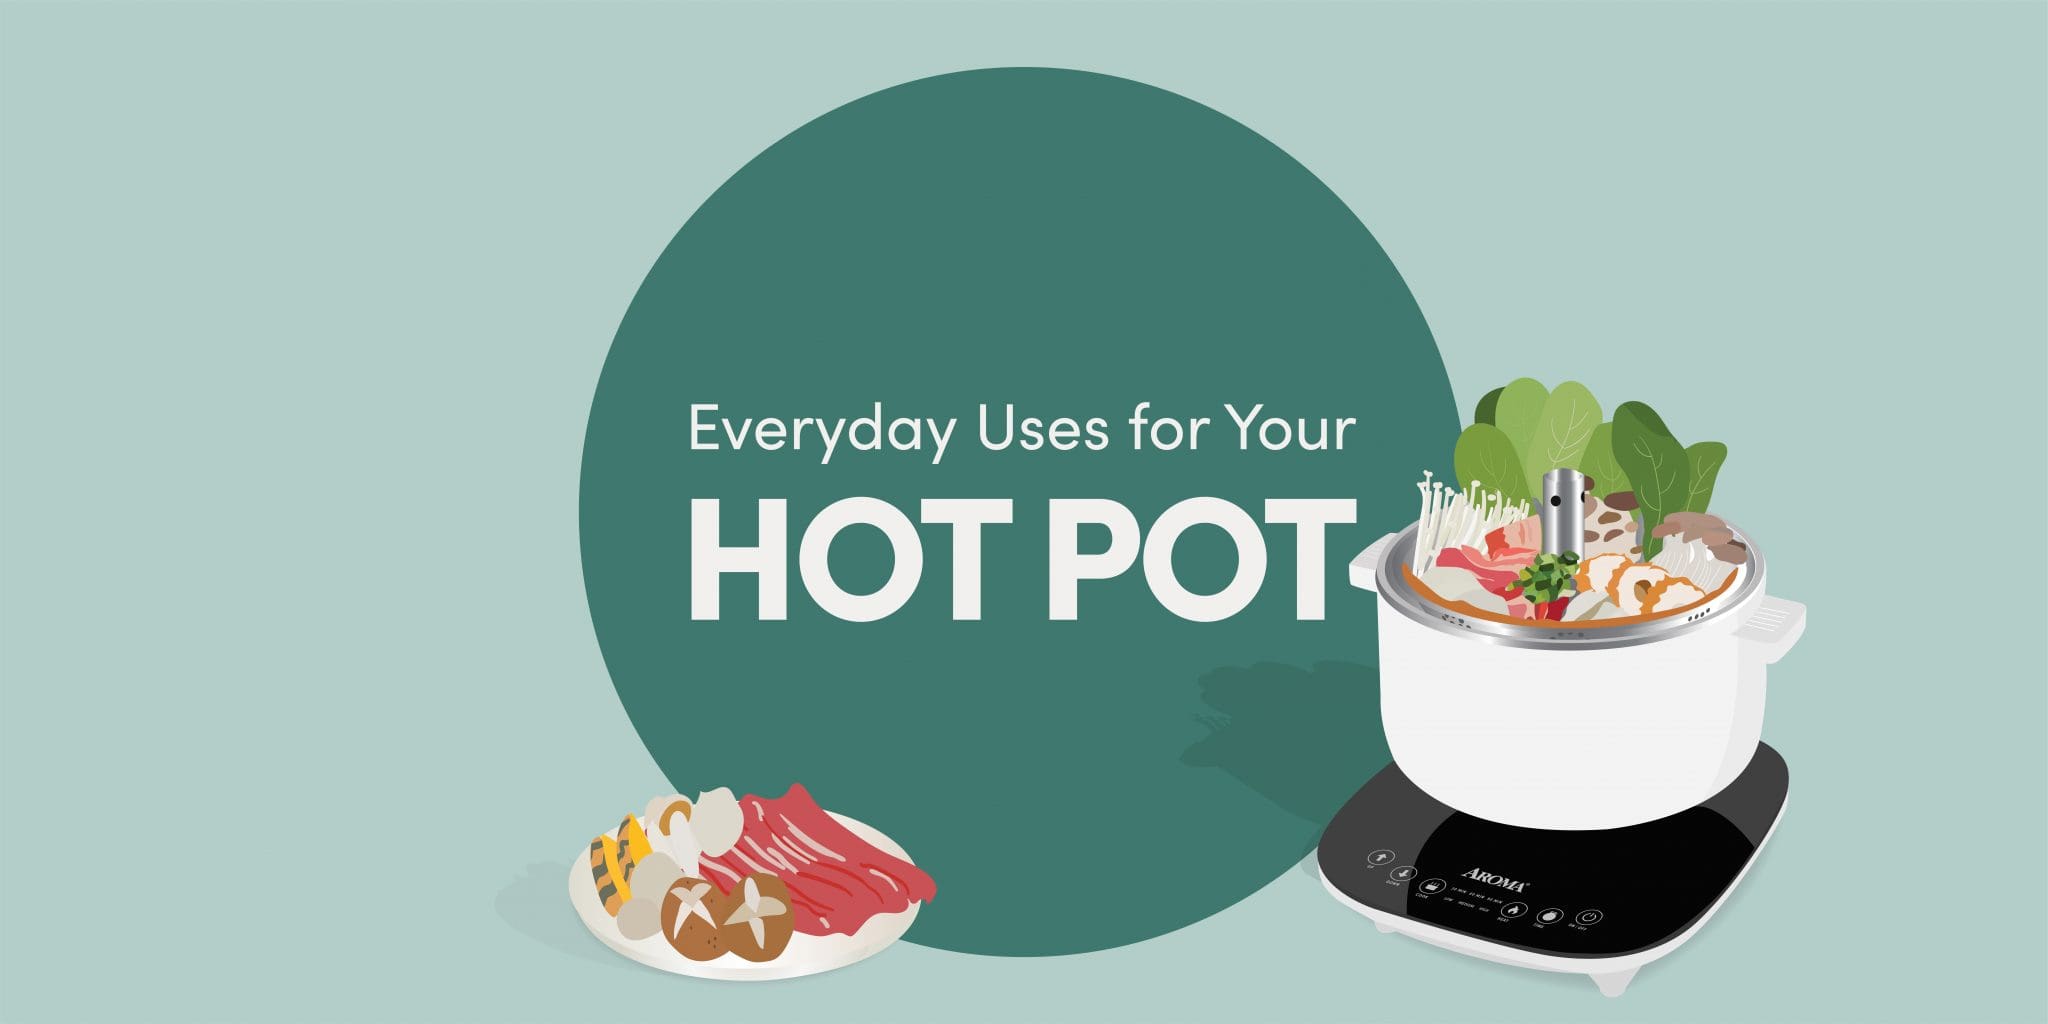 One-of-a-Kind 'Elevator' Hot Pot: Innovative Cooking Simplified